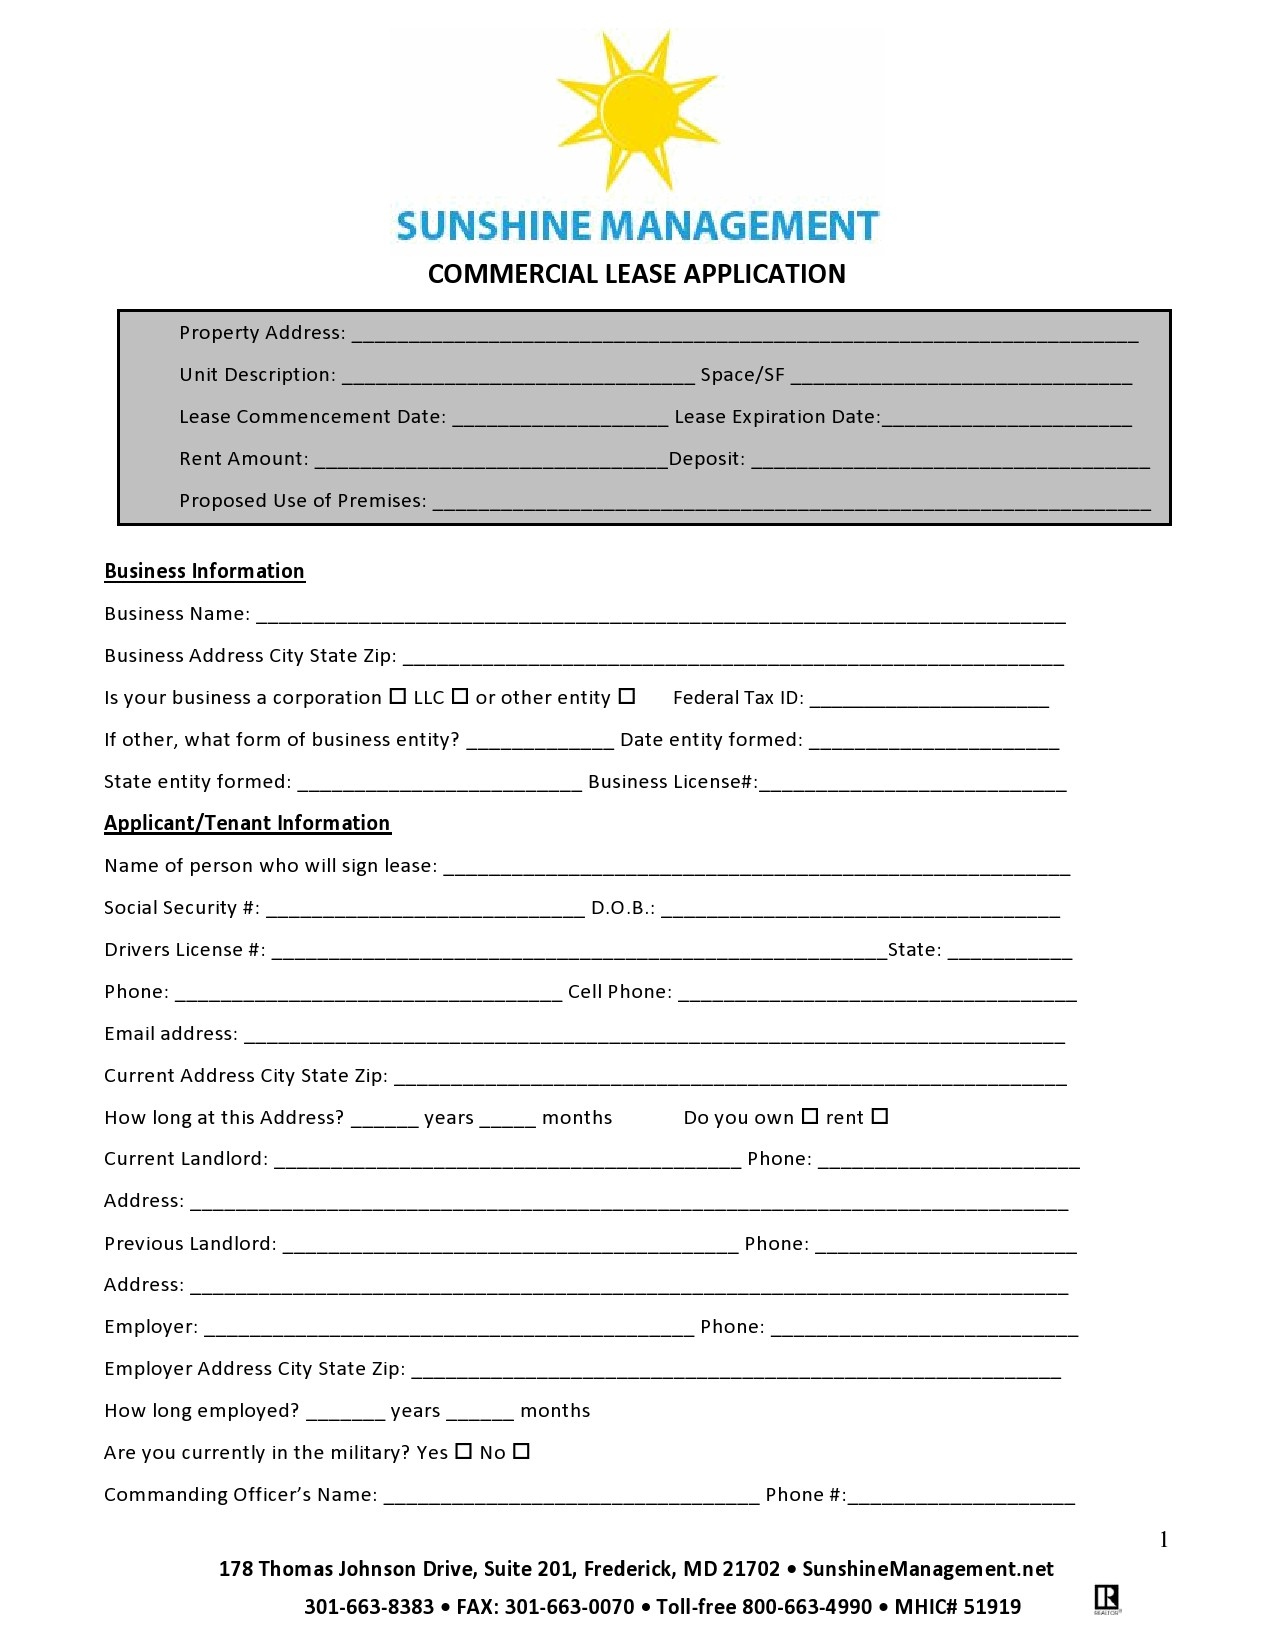 Free commercial lease application 18